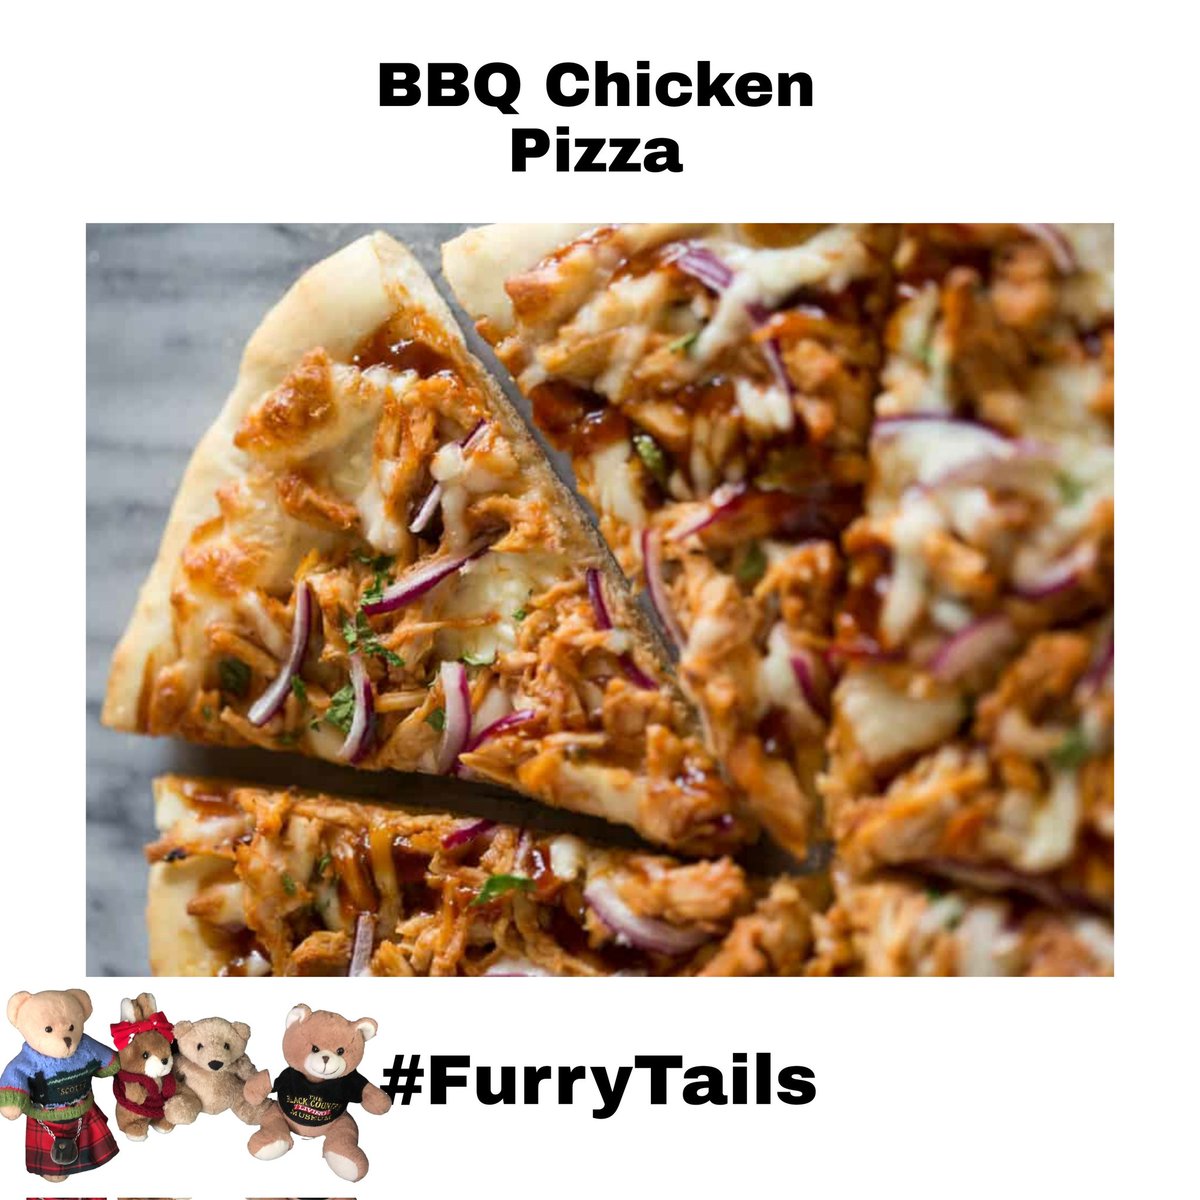 *sets aside a BBQ chicken pizza for @ScotBEricTrev * #FurryTails